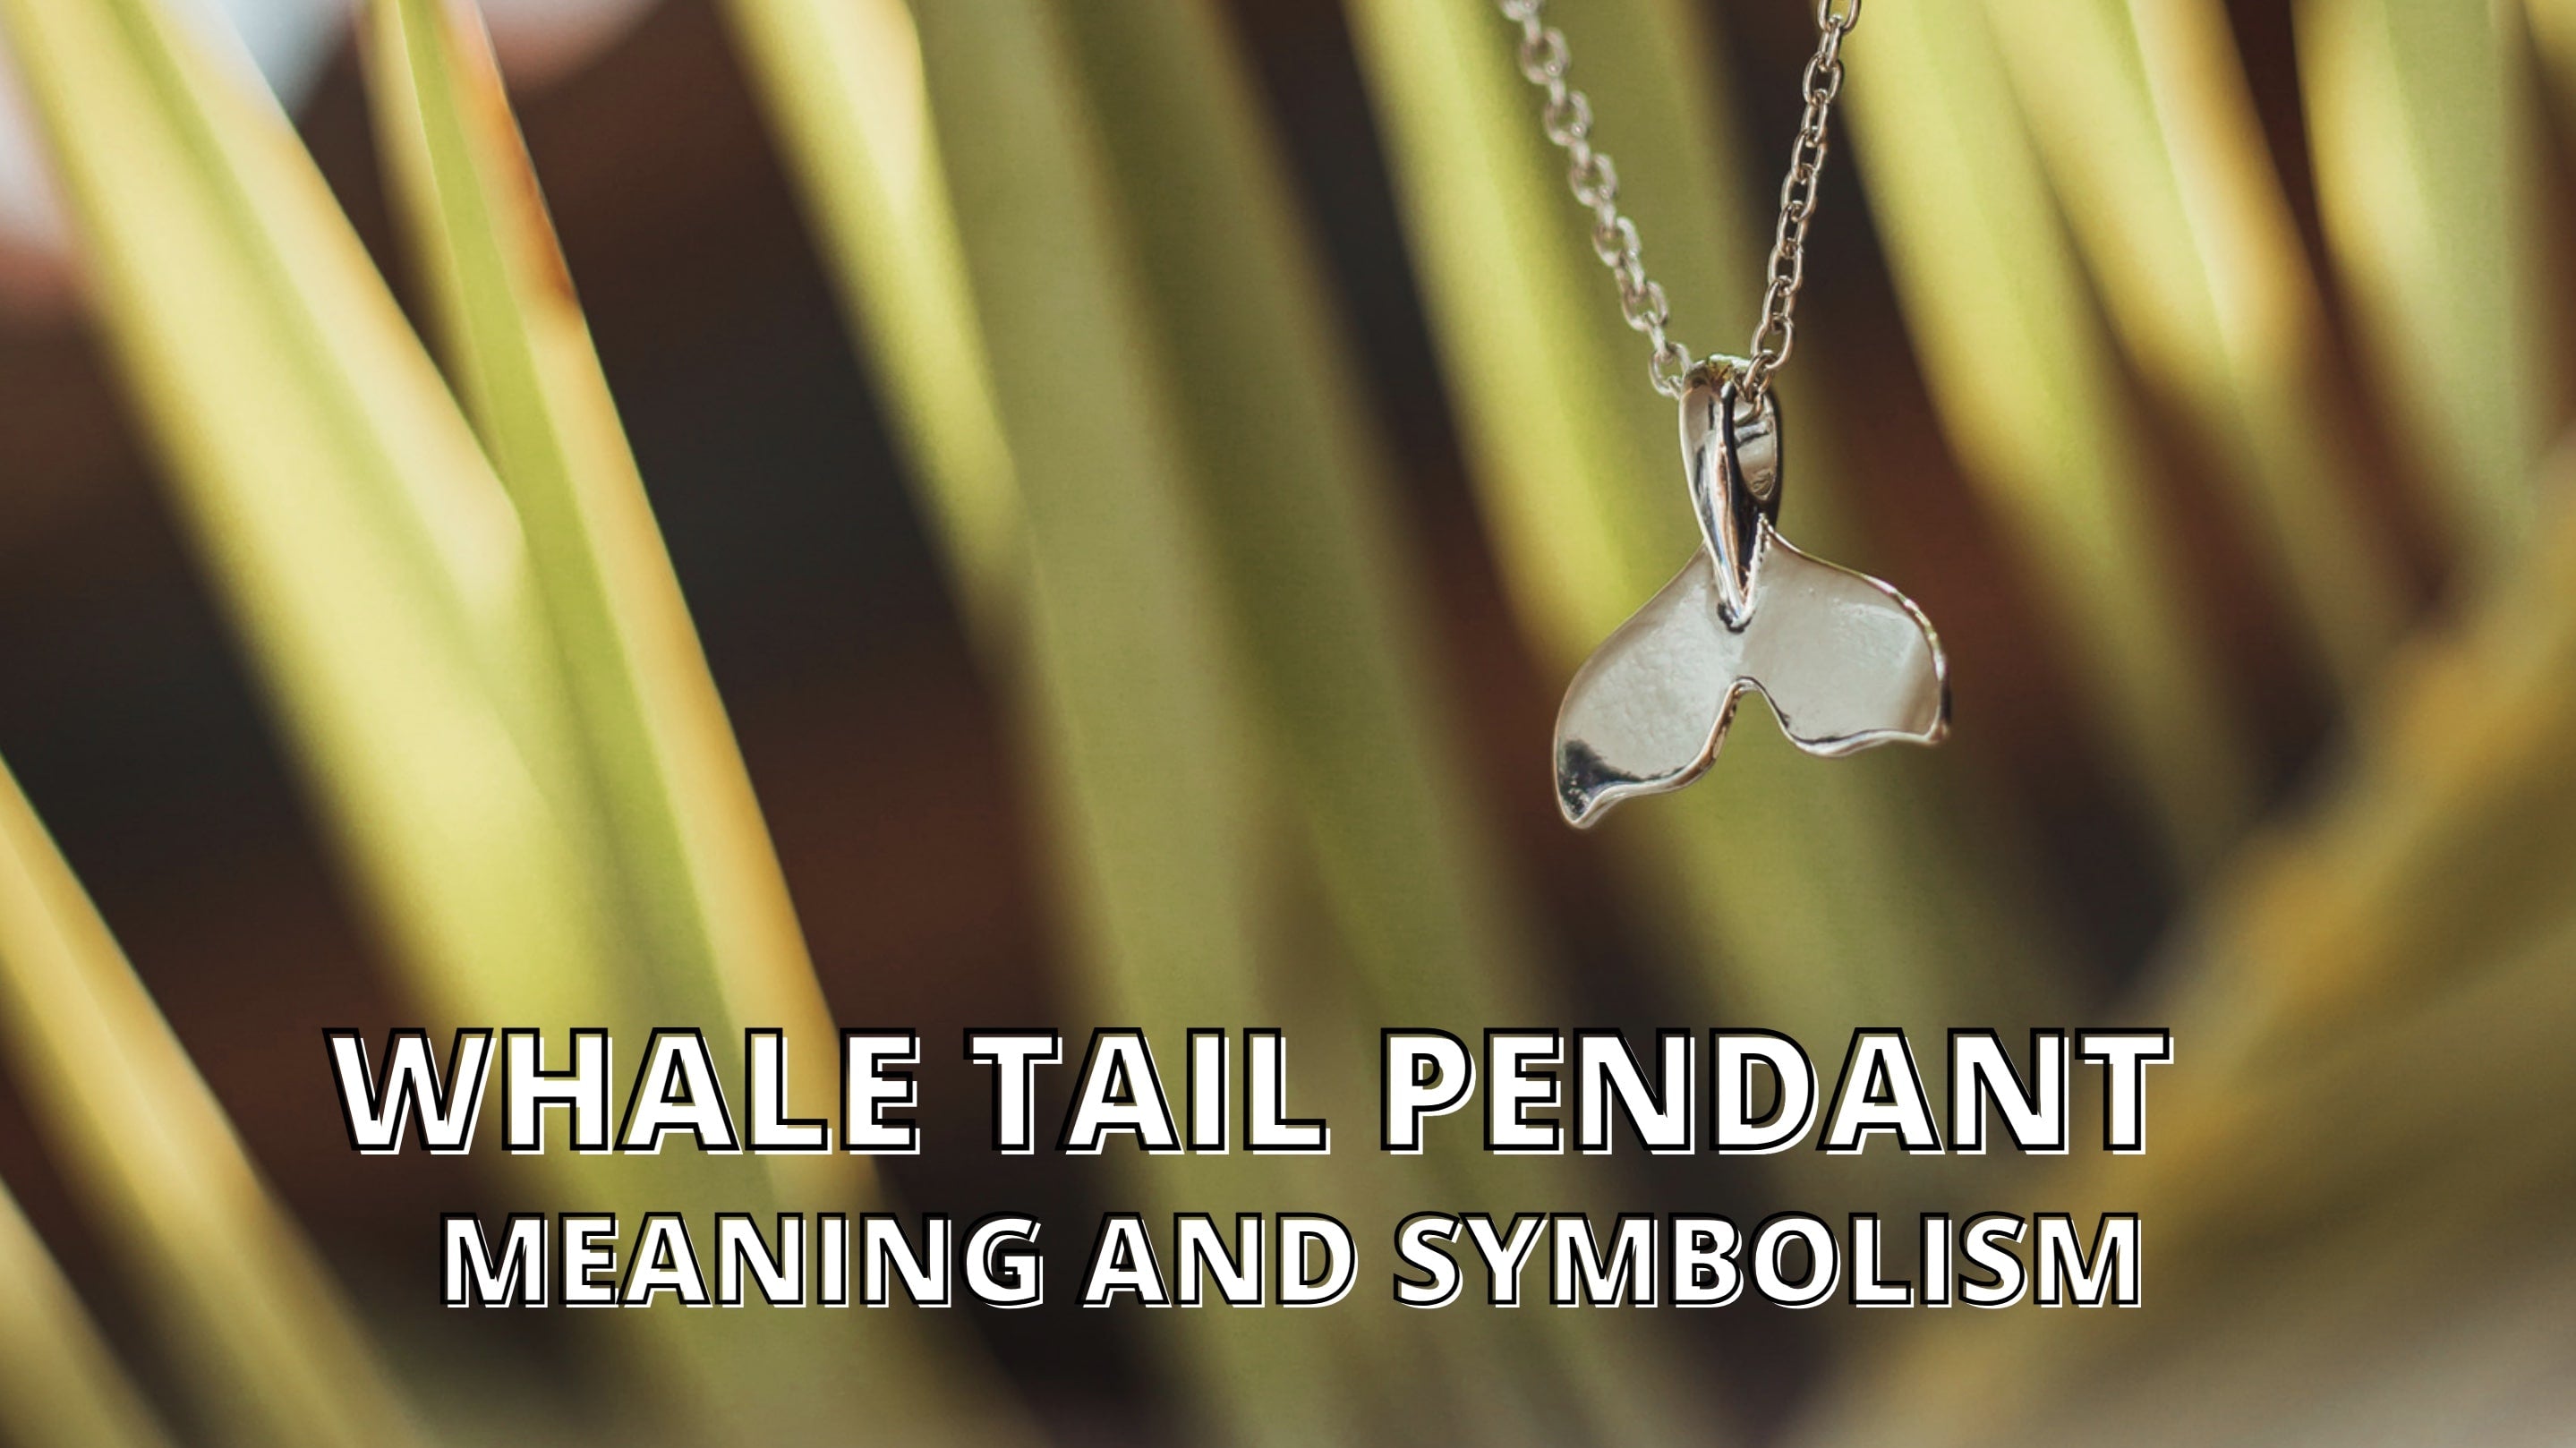 Meaning and Symbolism Of The Whale Tail Pendant